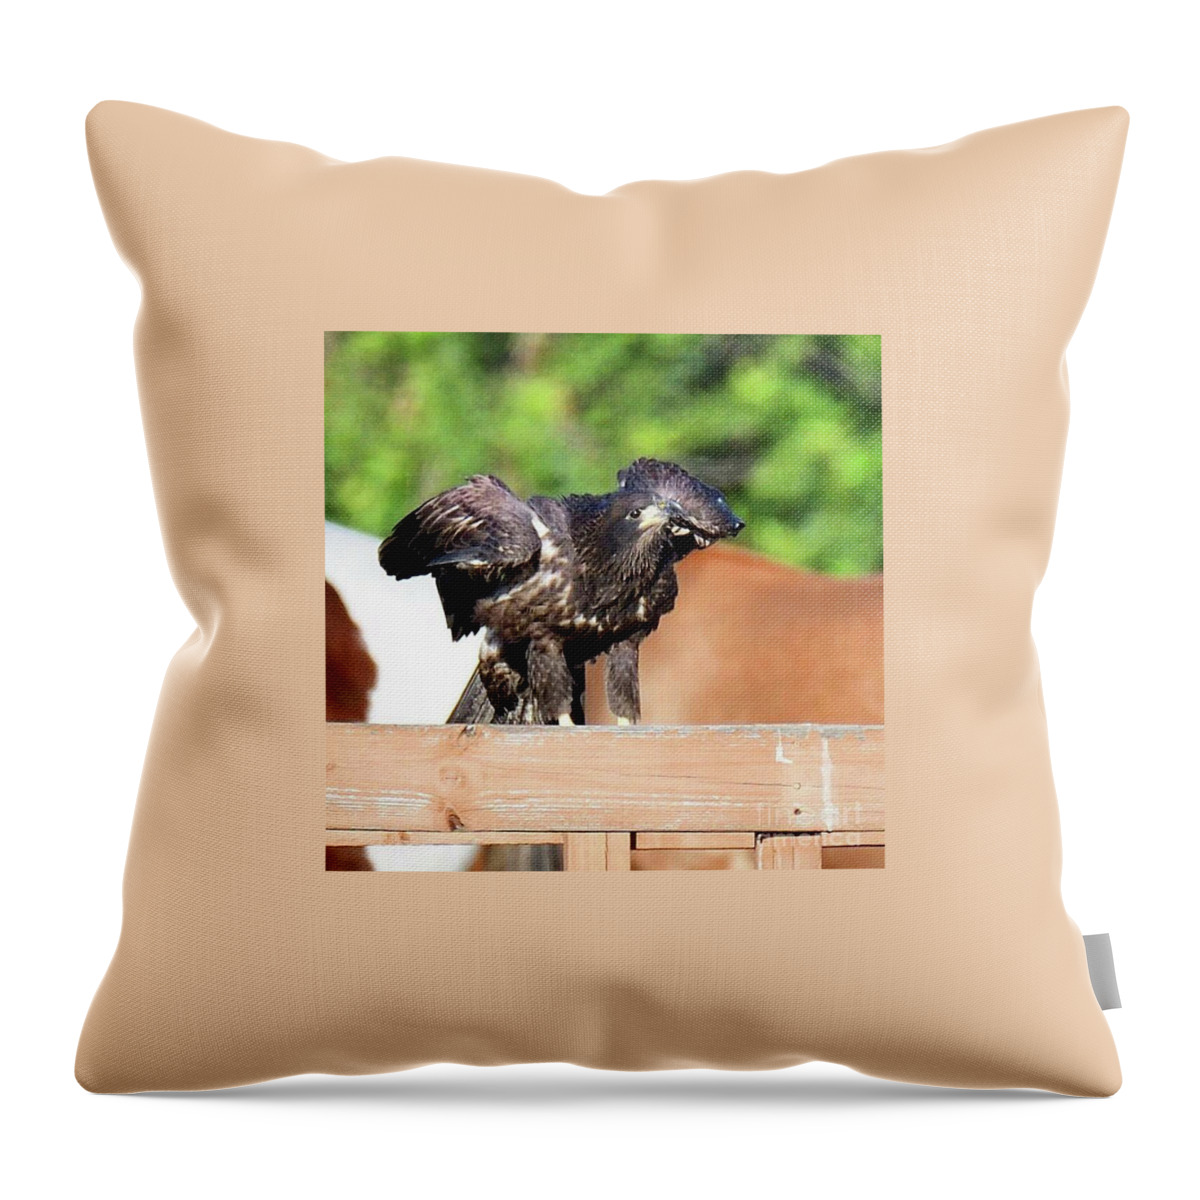 Bald Eagle Throw Pillow featuring the photograph E9 looking by Liz Grindstaff